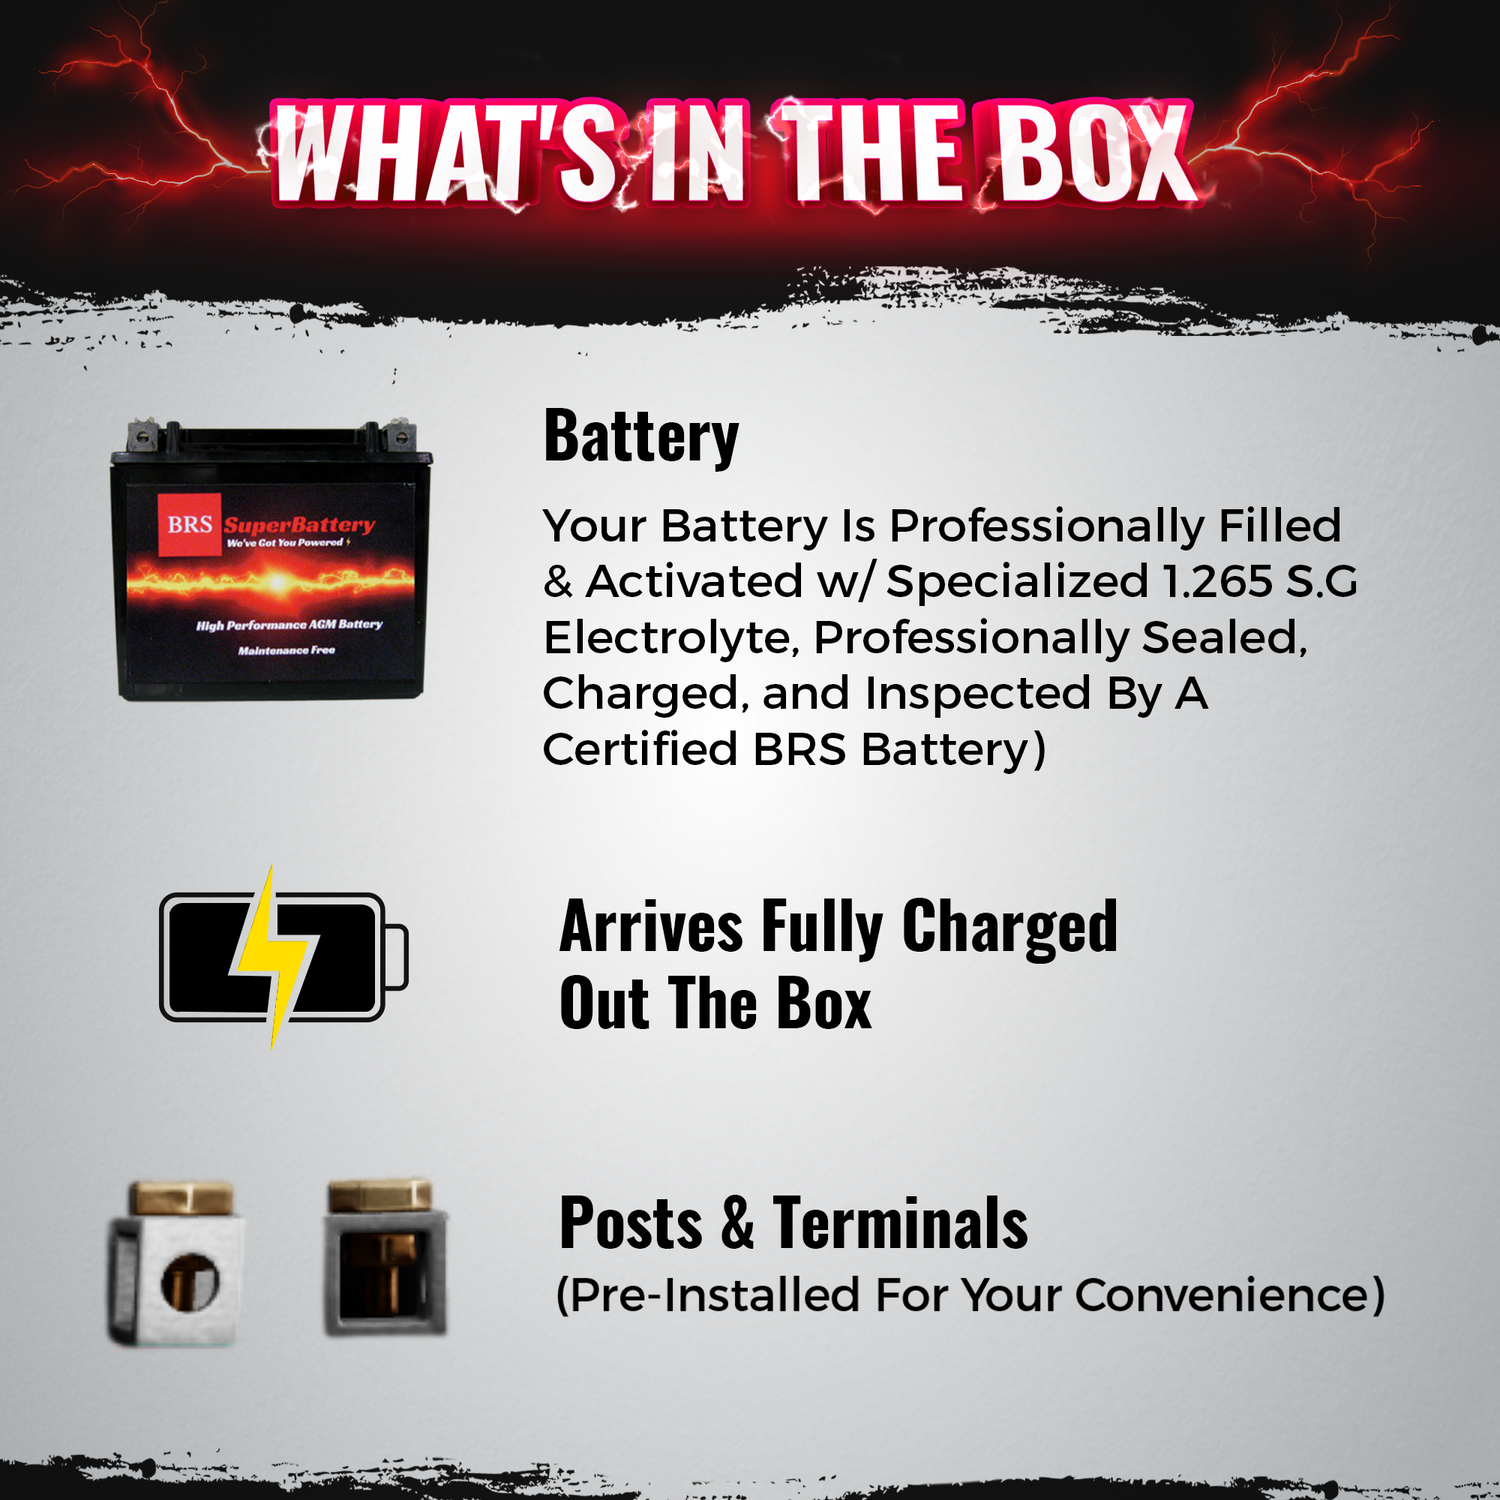 BRS9-BS 12v High Performance Sealed AGM PowerSport 10 Year Battery - BRS Super Battery